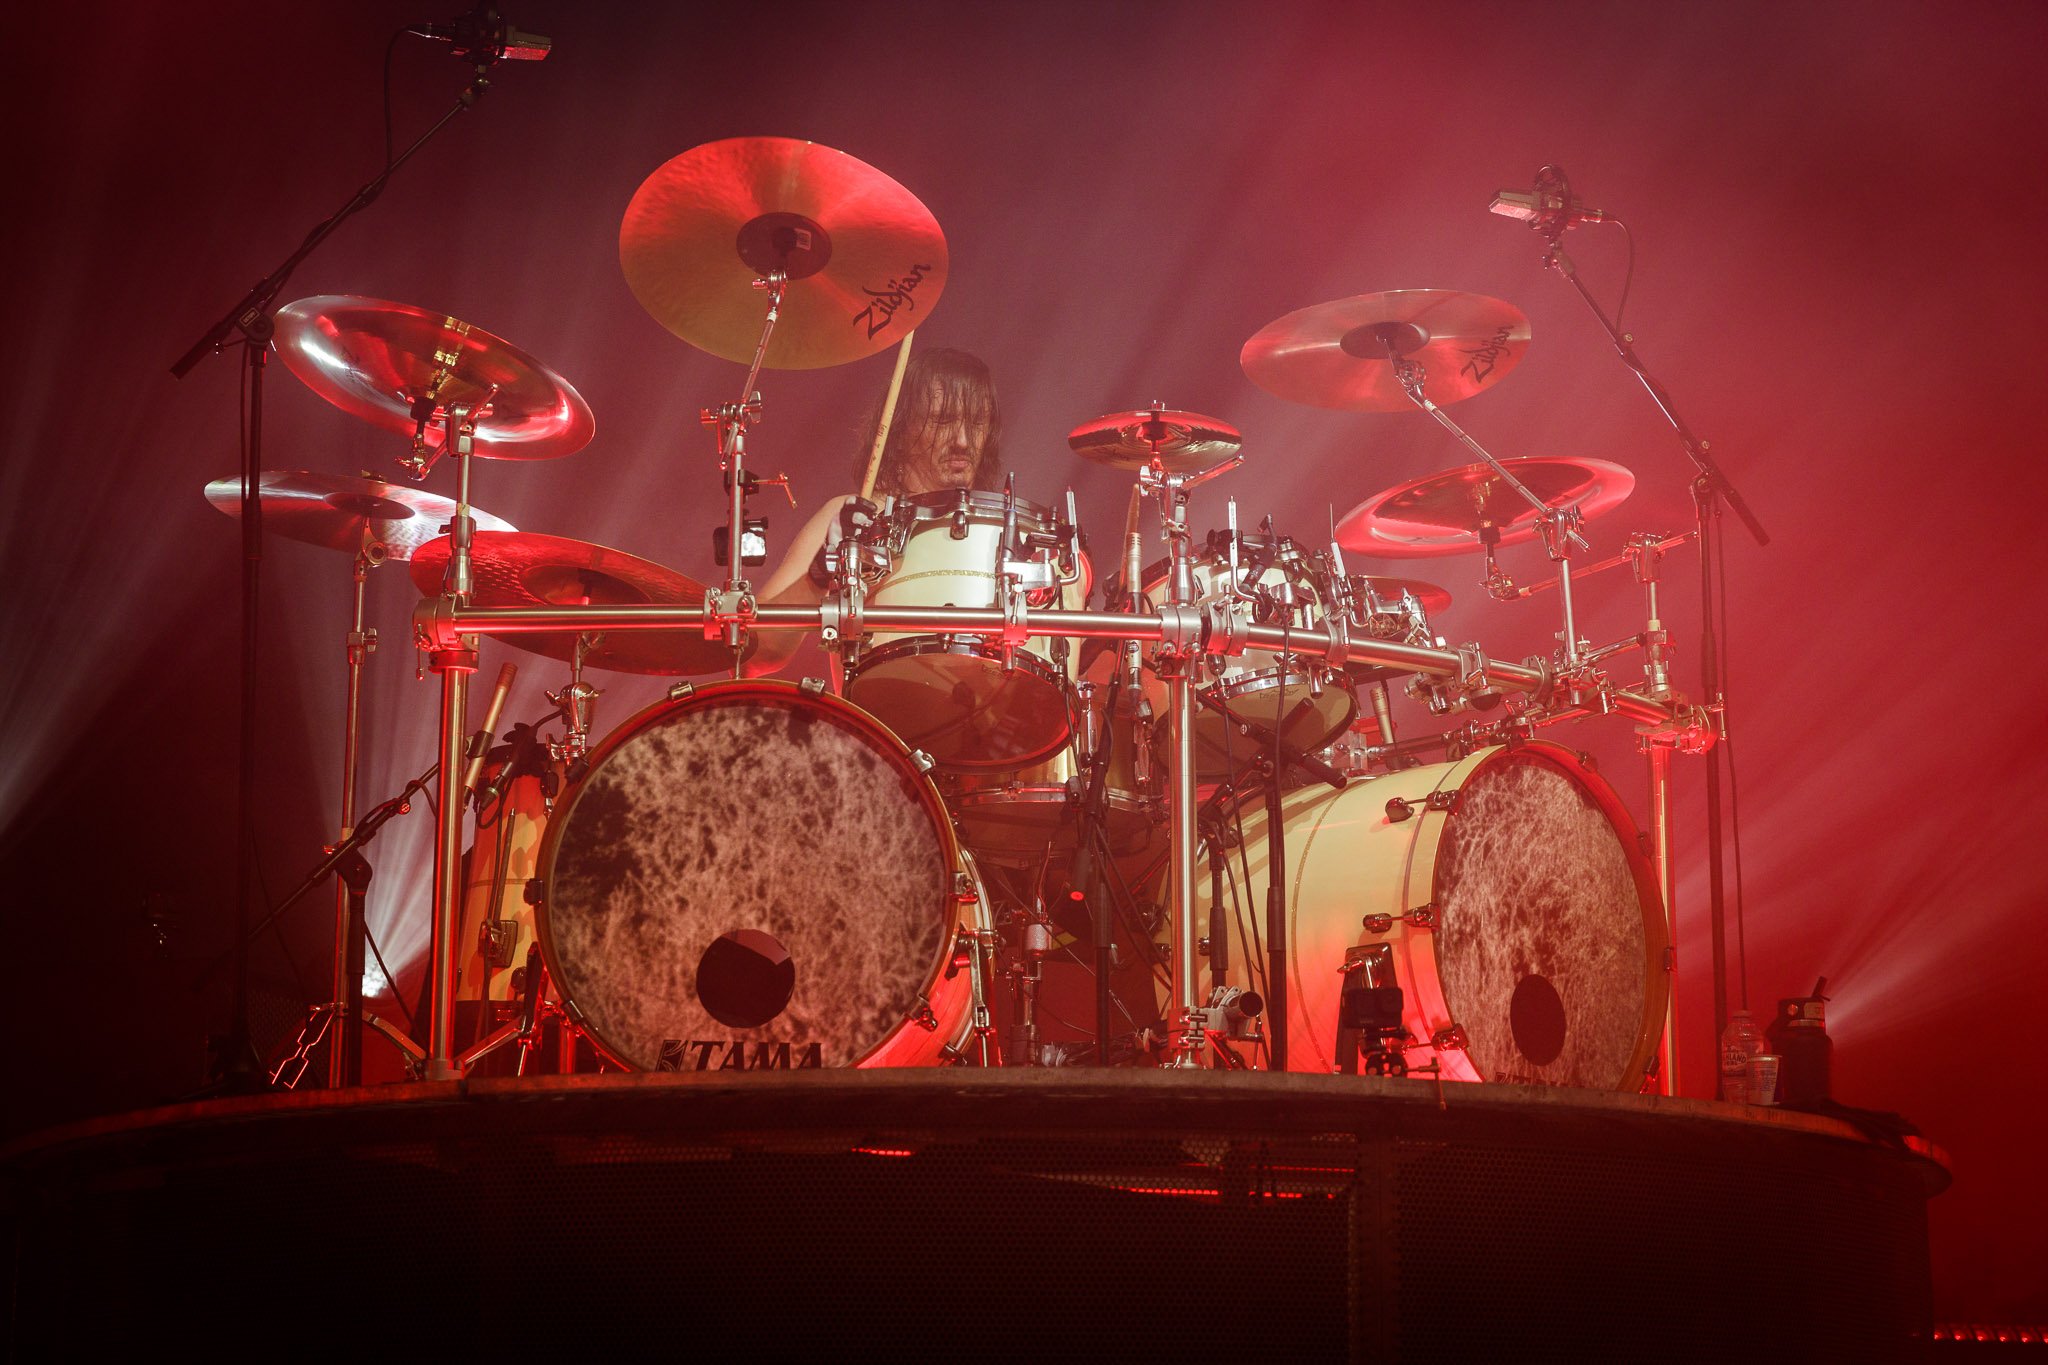 Gojira at the O2 Victoria Warehouse in Manchester on February 19